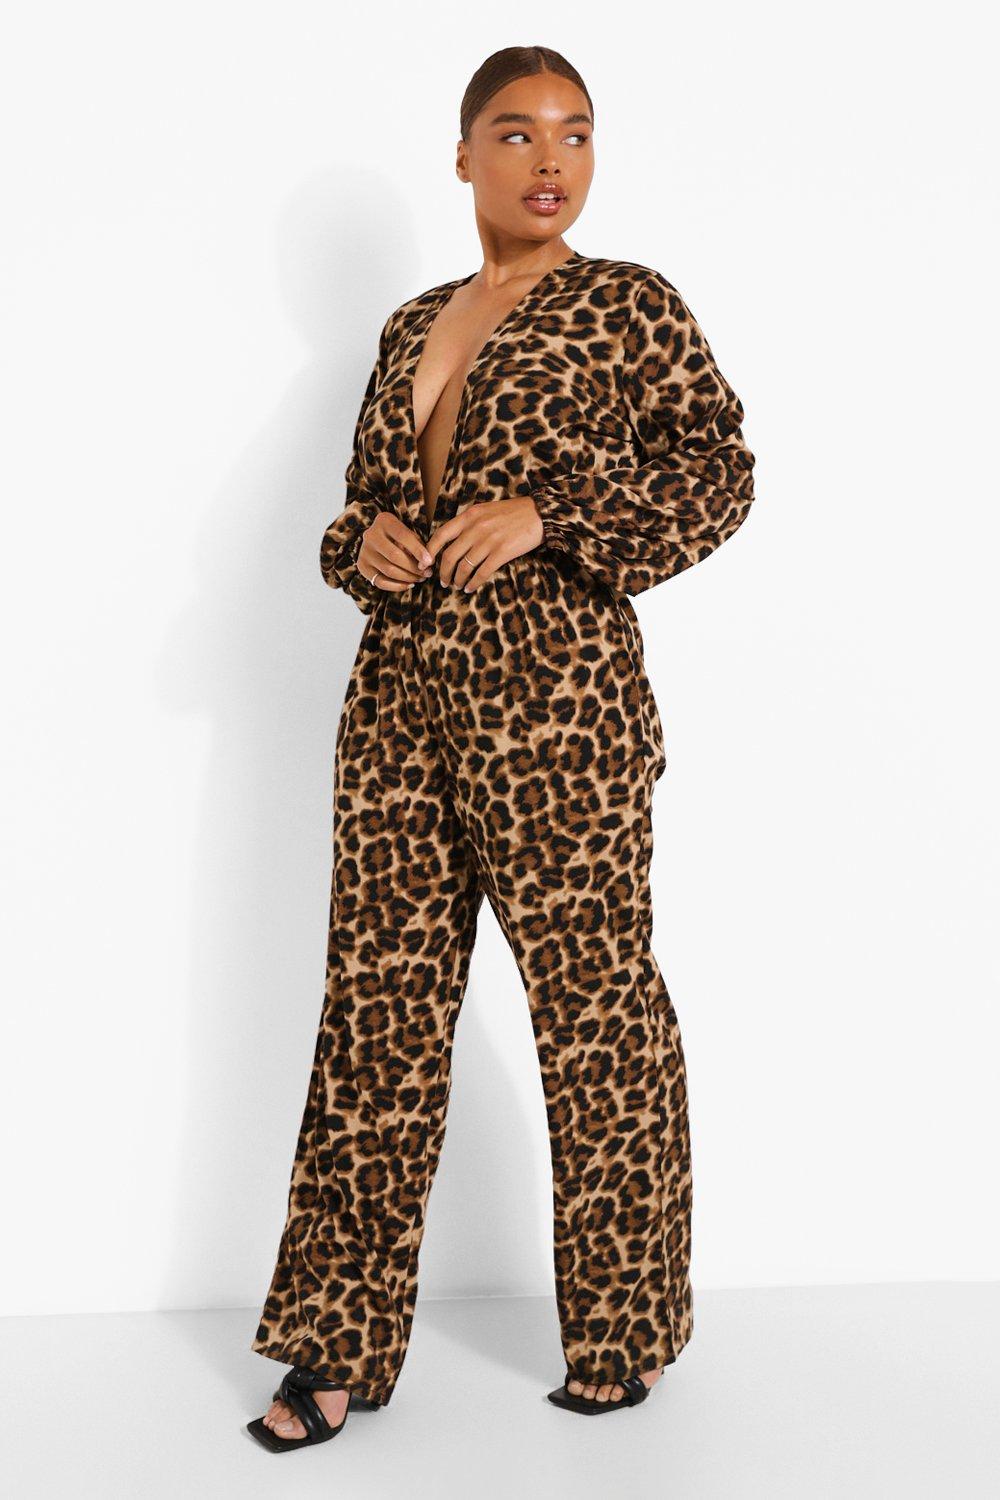 Boohoo Leopard Plisse Belted Romper in Black Womens Clothing Jumpsuits and rompers Playsuits 